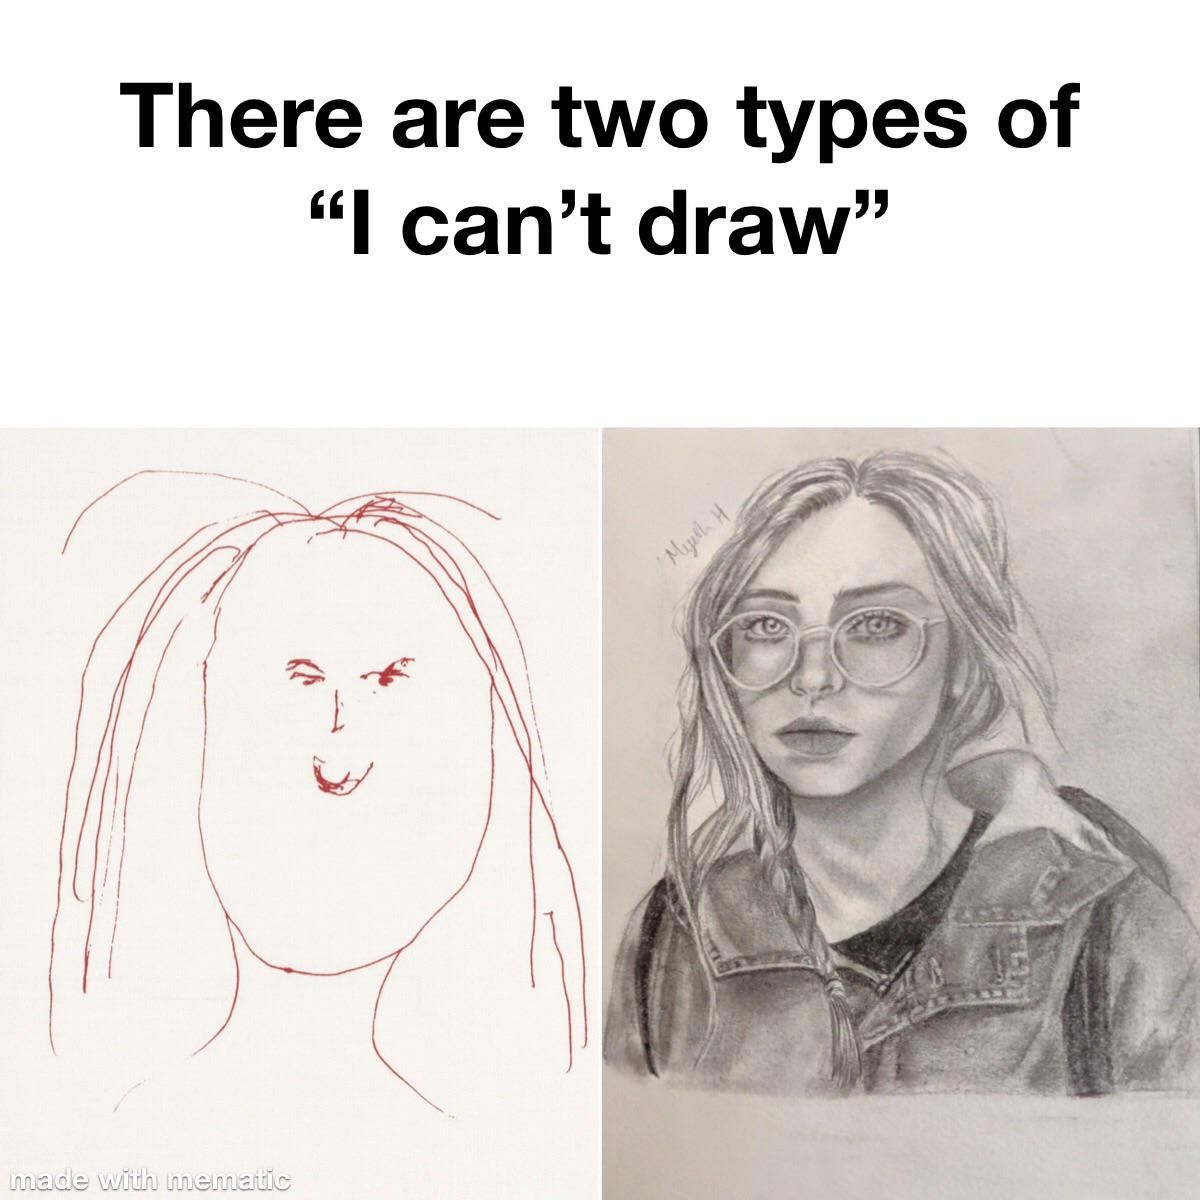 Emily we all know you can draw